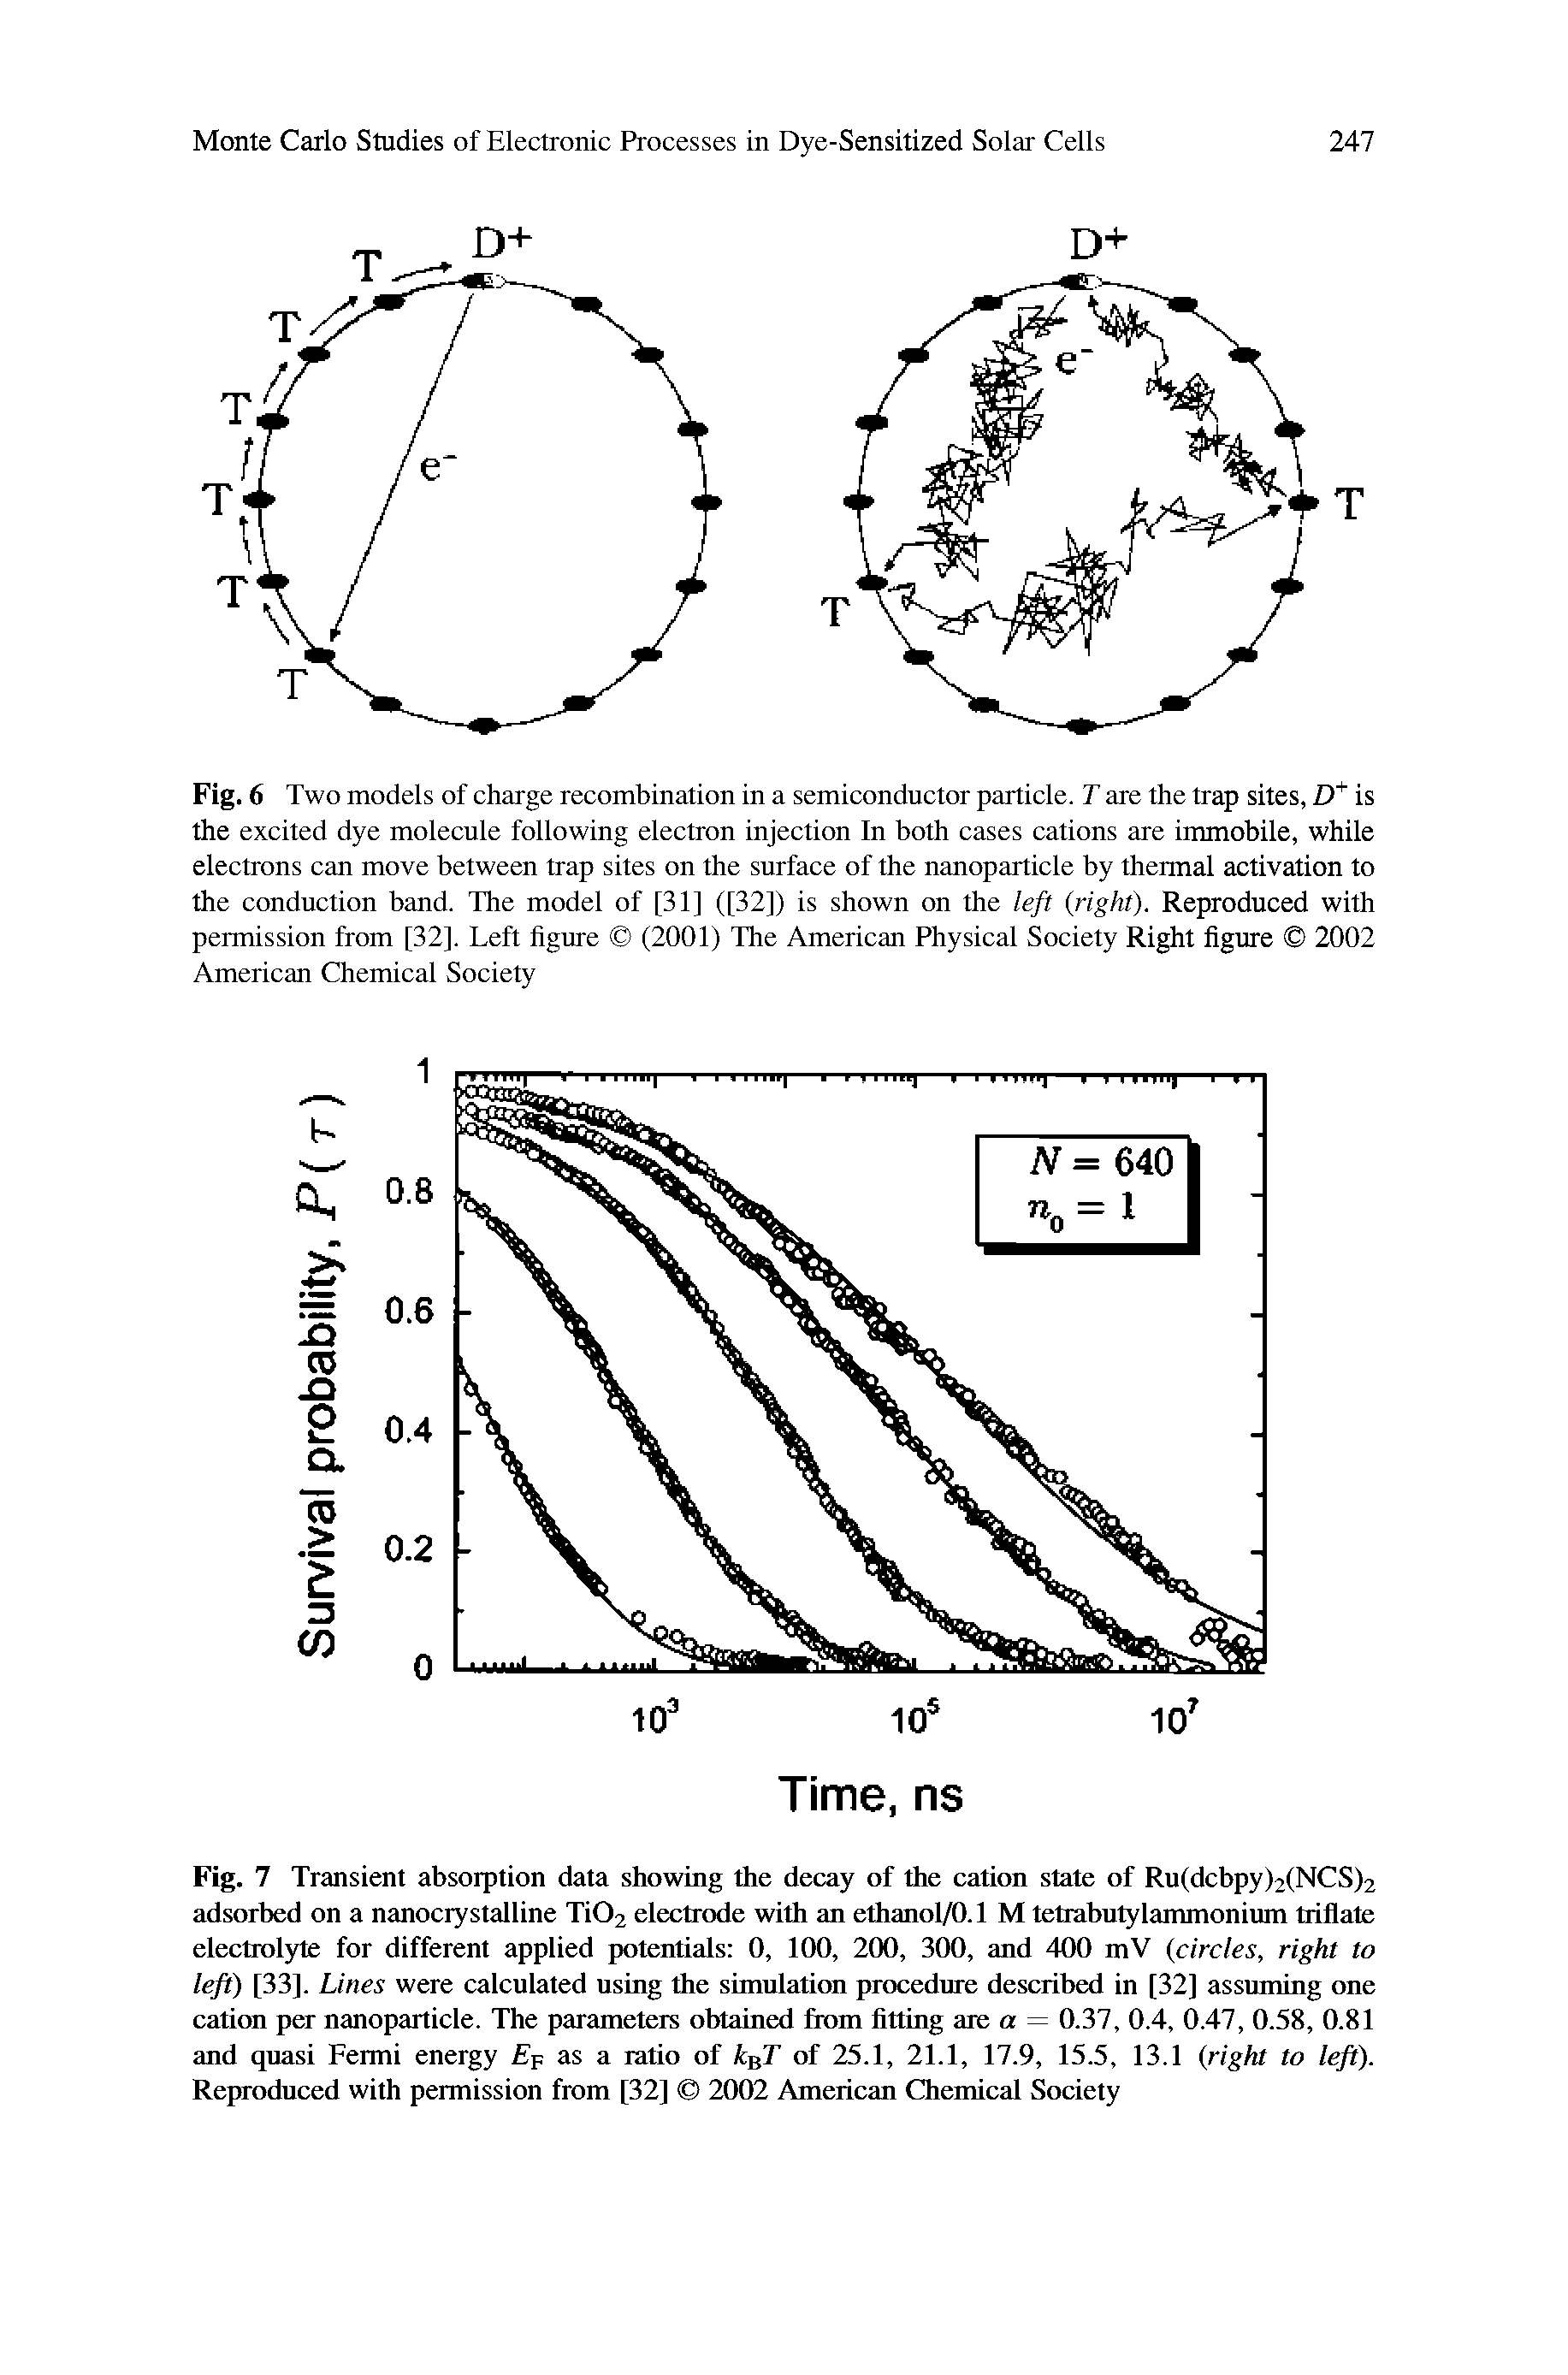 Fig. 7 Transient absorption data showing the decay of the cation state of Ru(dcbpy>2(NCS)2 adsorbed on a nanocrystalline Ti02 electrode with an ethanol/D-l M tetrabutylammonium triilate electrolyte for different applied potentials 0, 100, 200, 300, and 400 mV (circles, right to left) [33]. Lines were calculated using the simulatirai procedure described in [32] assuming one catirai pCT nanoparticle. The parameters obtained fiorn fitting are a = 0.37, 0.4, 0.47, 0.58, 0.81 and quasi Fermi energy Ep as a ratio of k T of 25.1, 21.1, 17.9, 15.5, 13.1 (right to left). Reproduced with permission from [32] 2002 American Chemical Society...